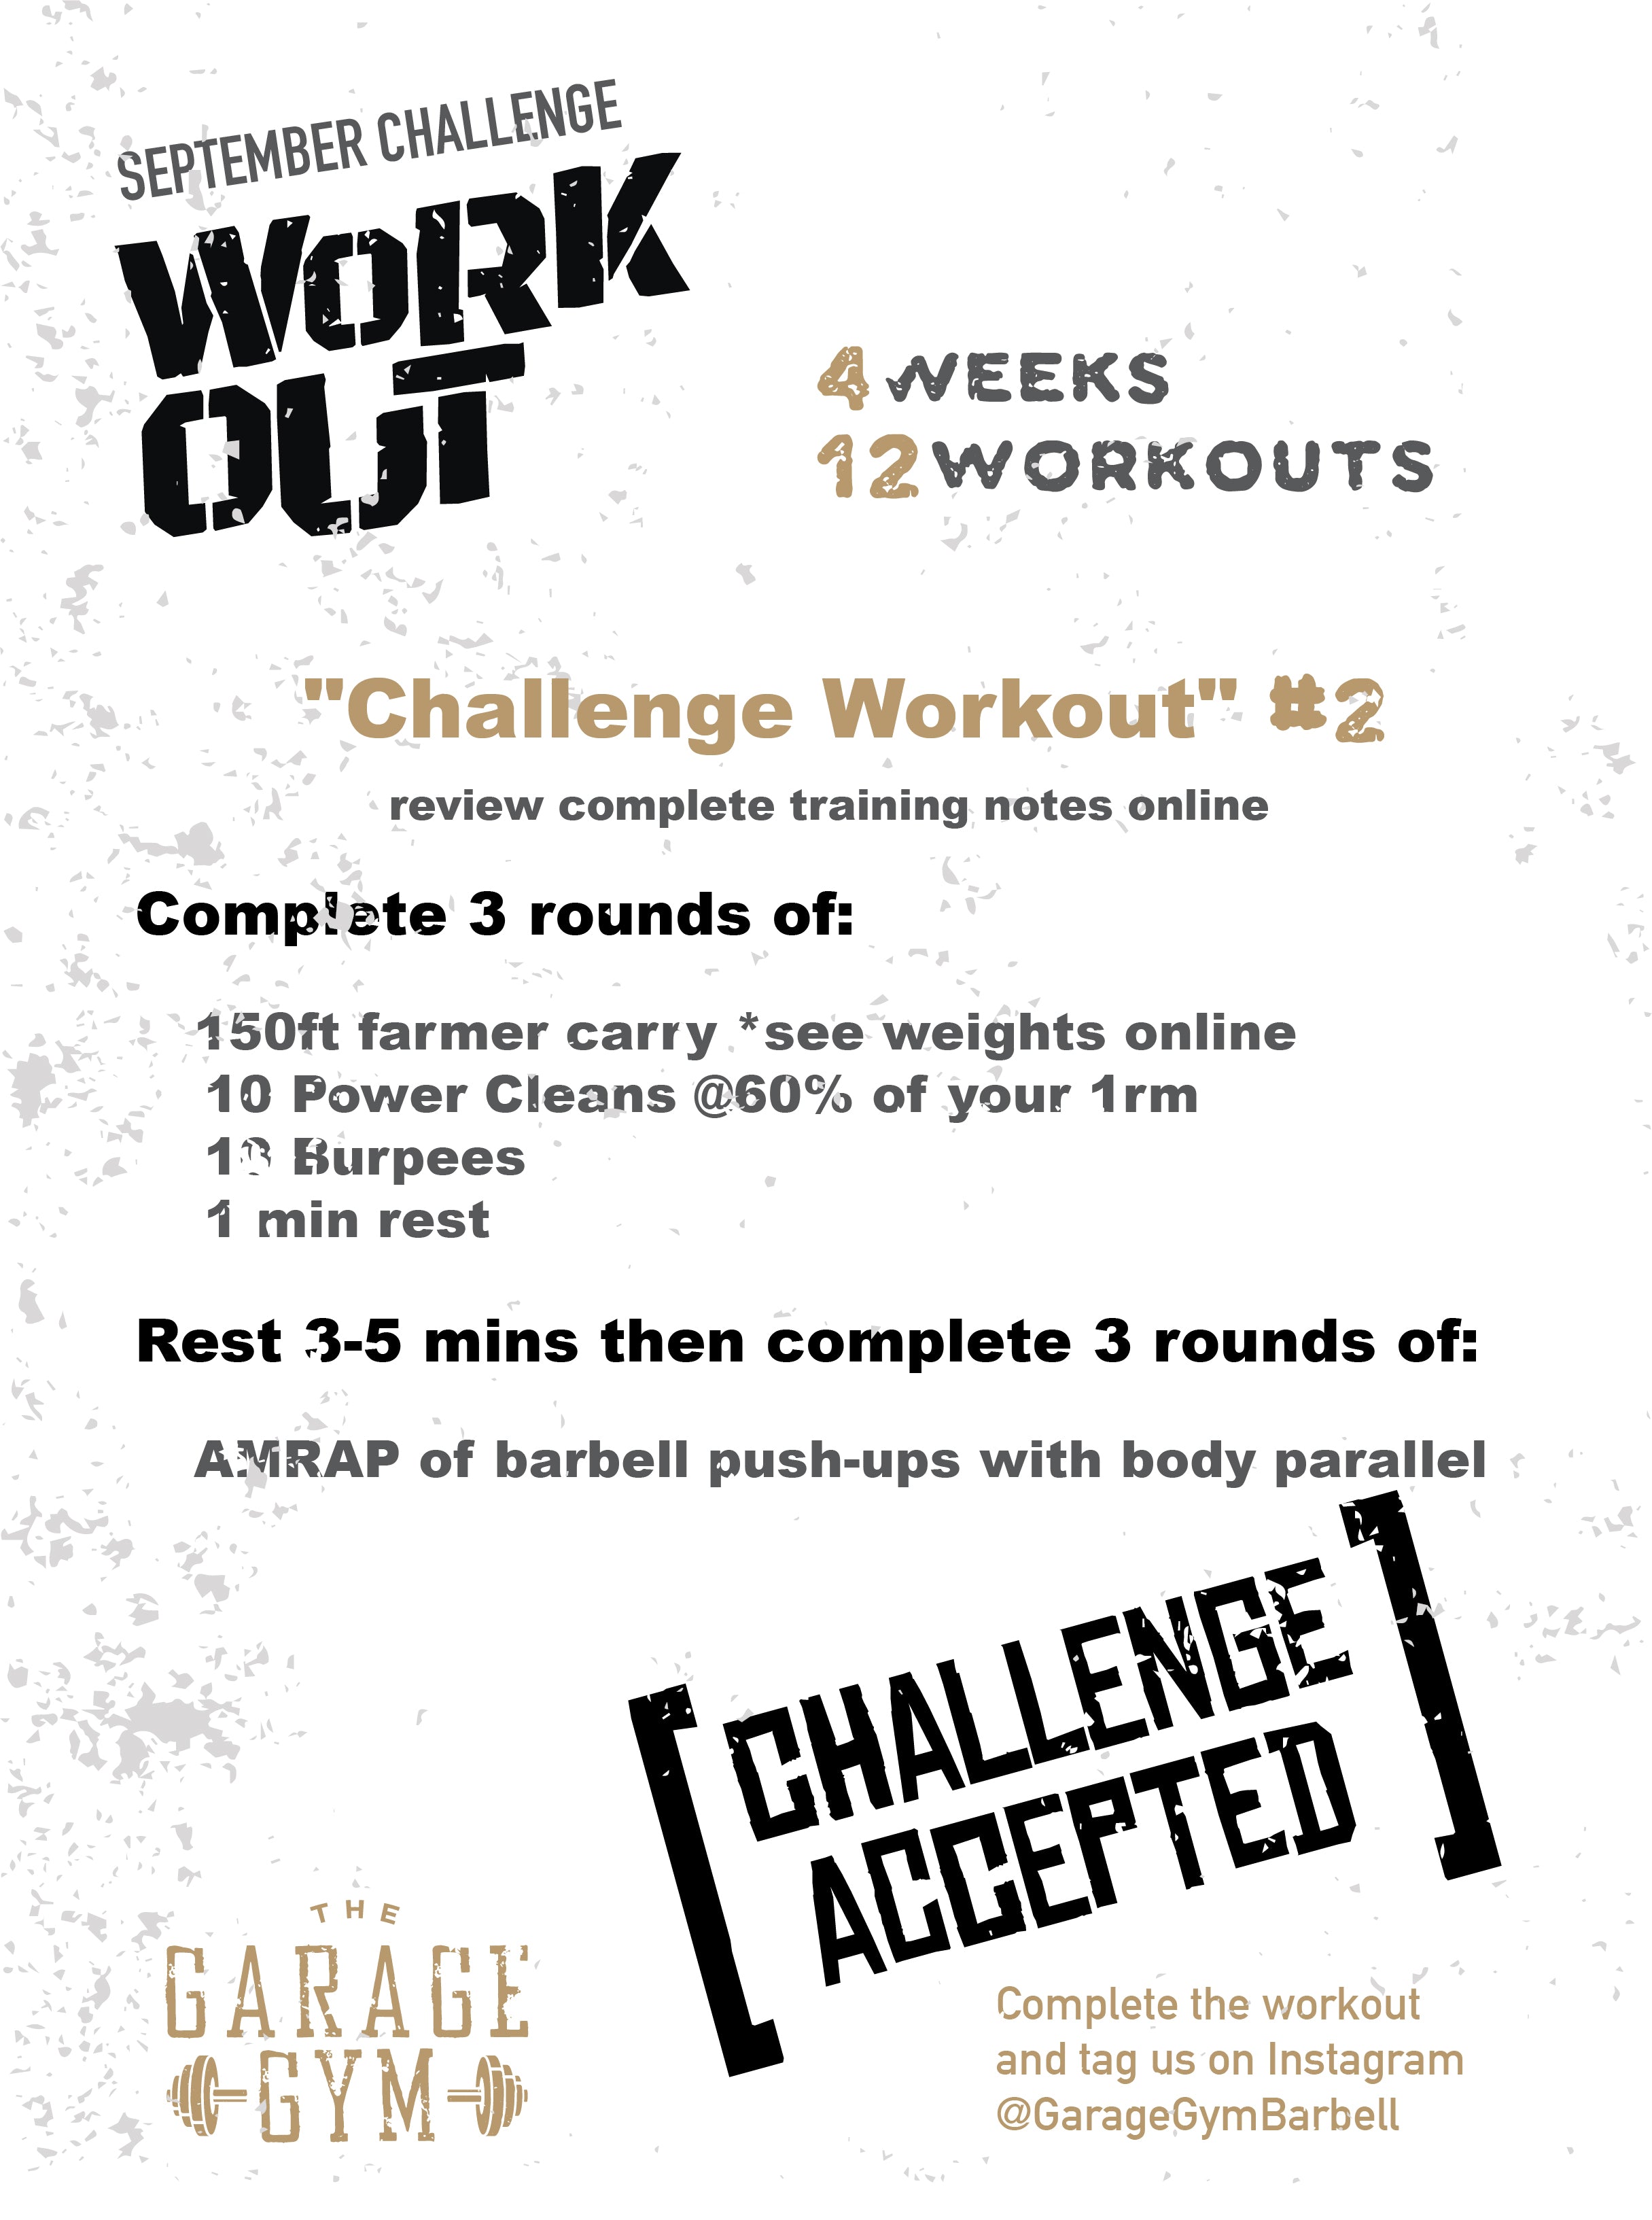 9-4-19 Challenge Workout #2 Full Body